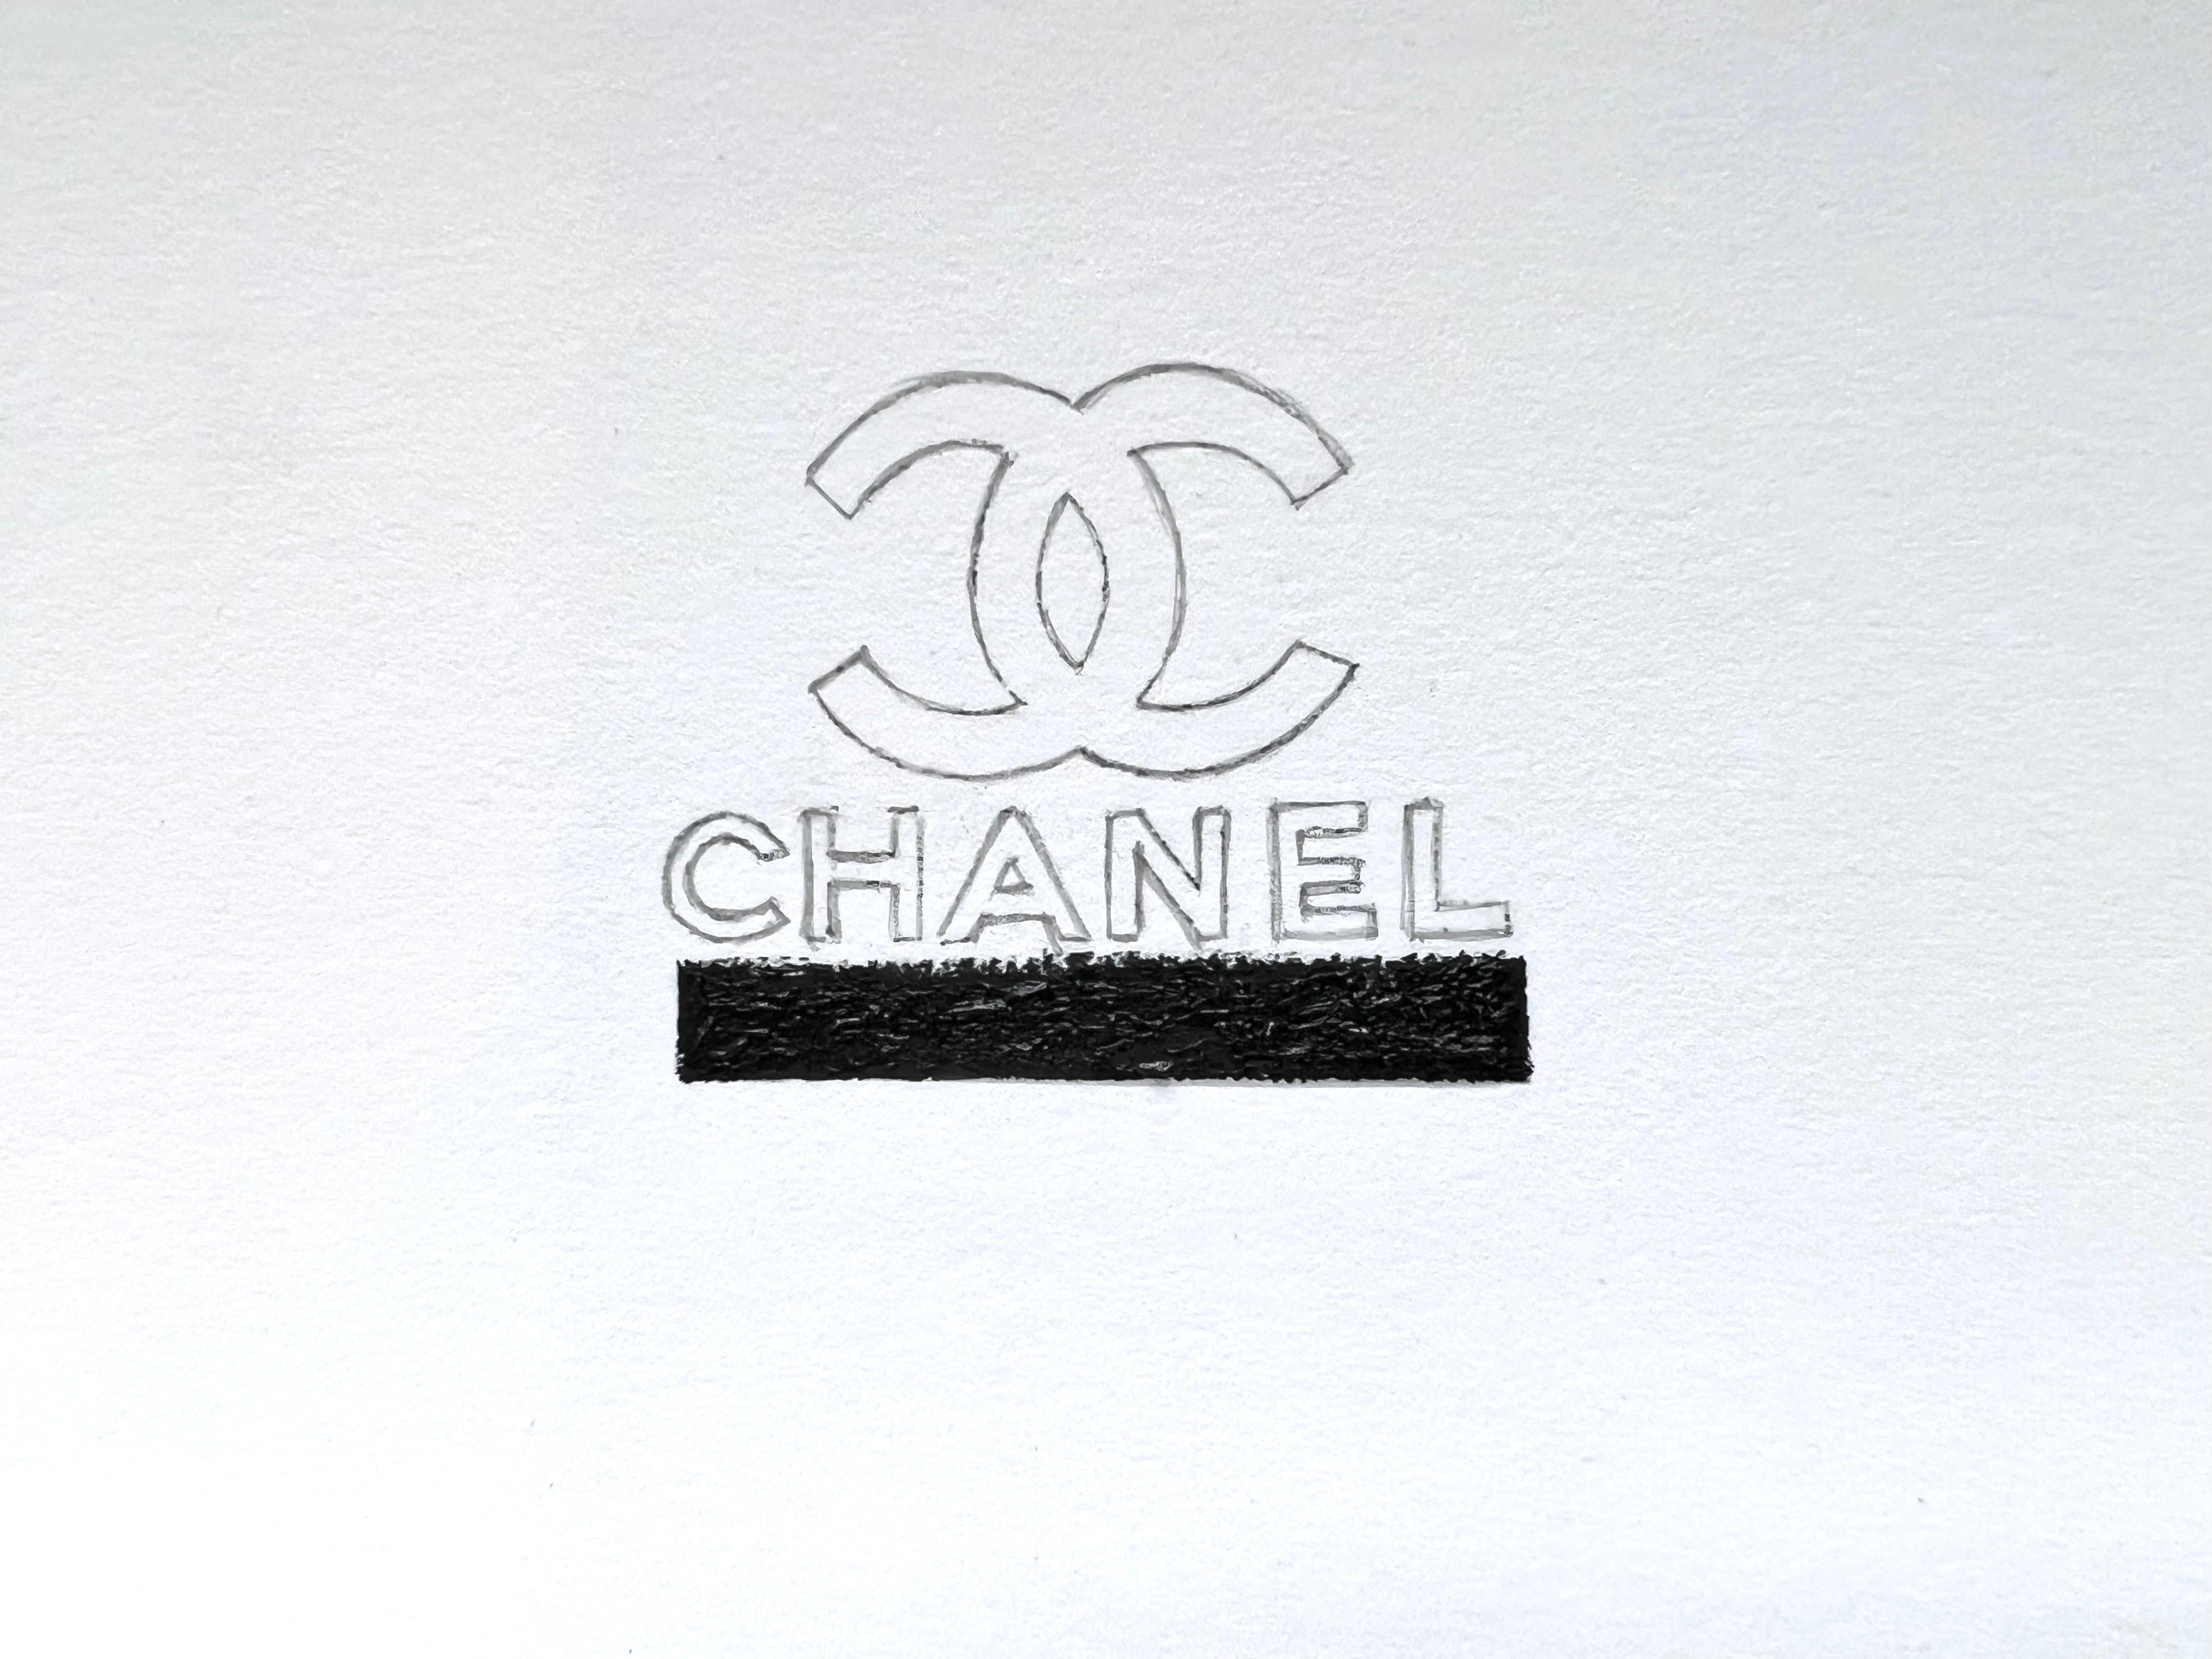 Homage to the iconic Chanel logo. This pencil rendering underlined with black textured paint makes for a minimalistic outcome. With focus on simple composition, this artwork is done on archival, acid free, cold press paper. Small art has a lot to